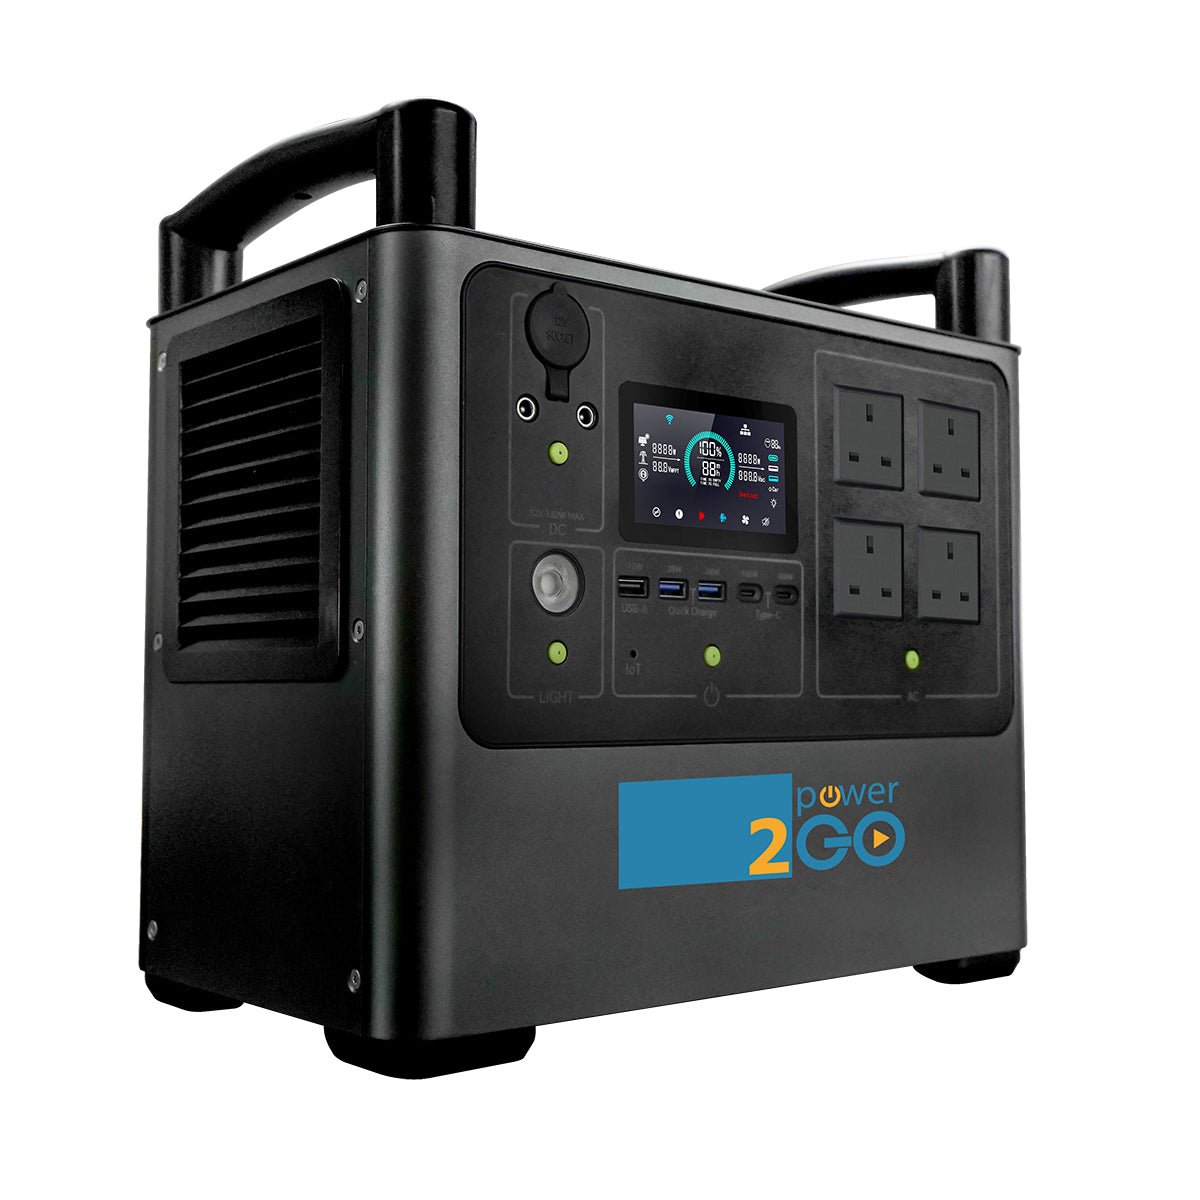 Angled view of portable power station - Power-2Go 2000Pro